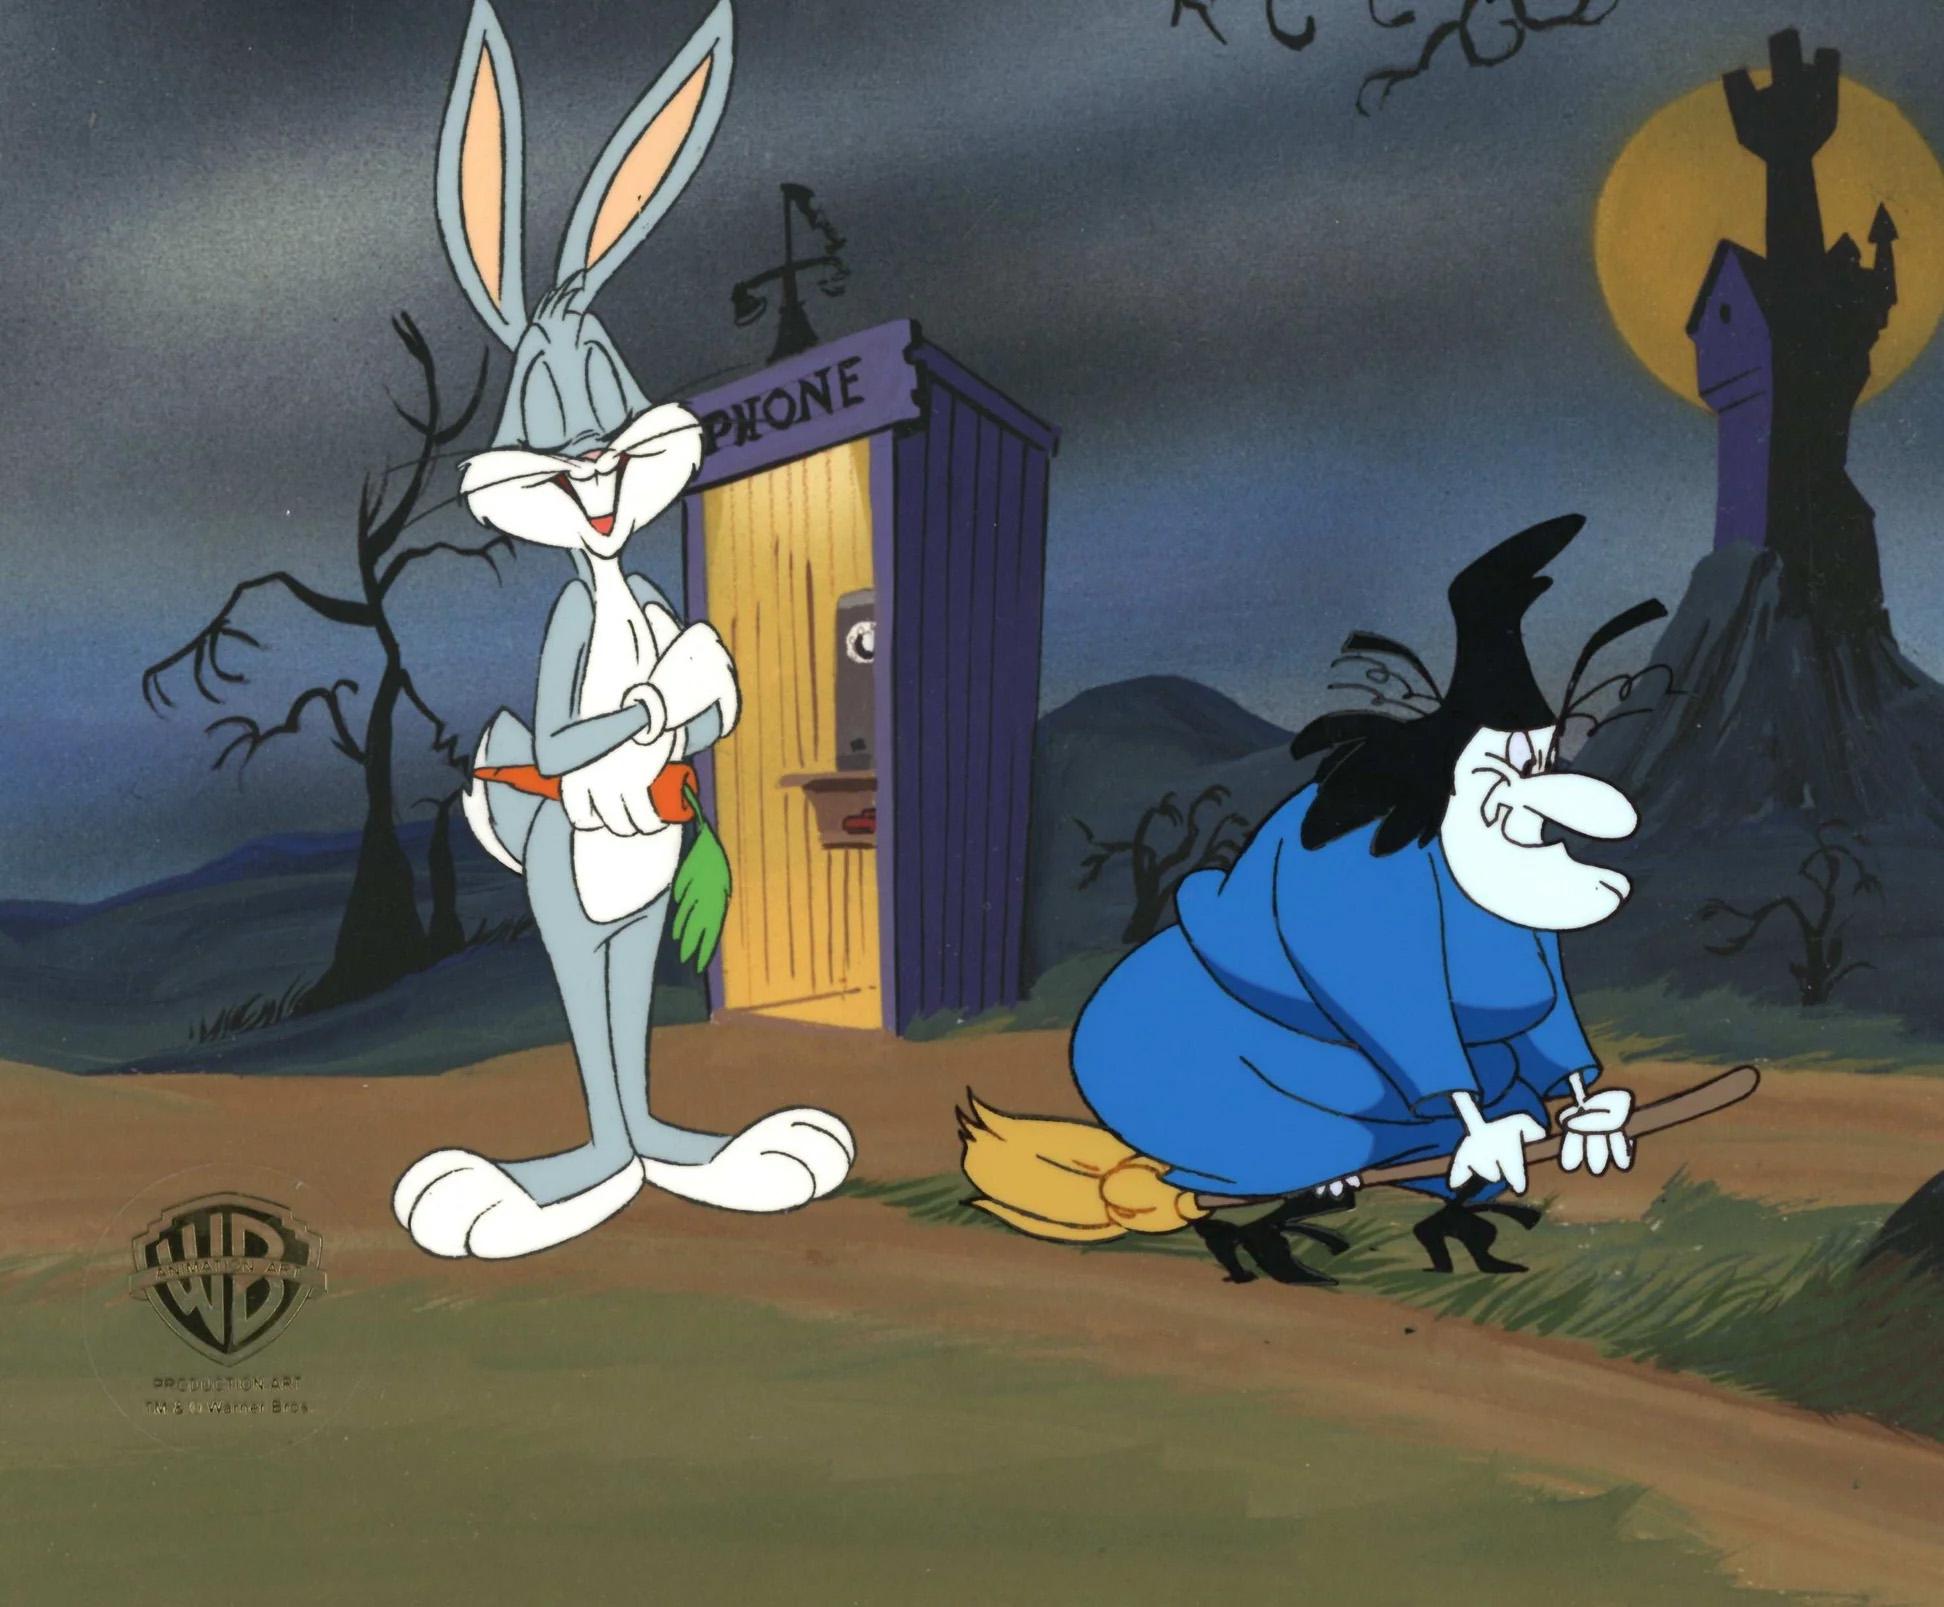 Looney Tunes Original Production Cel: Bugs Bunny and Witch Hazel - Art by Looney Tunes Studio Artists